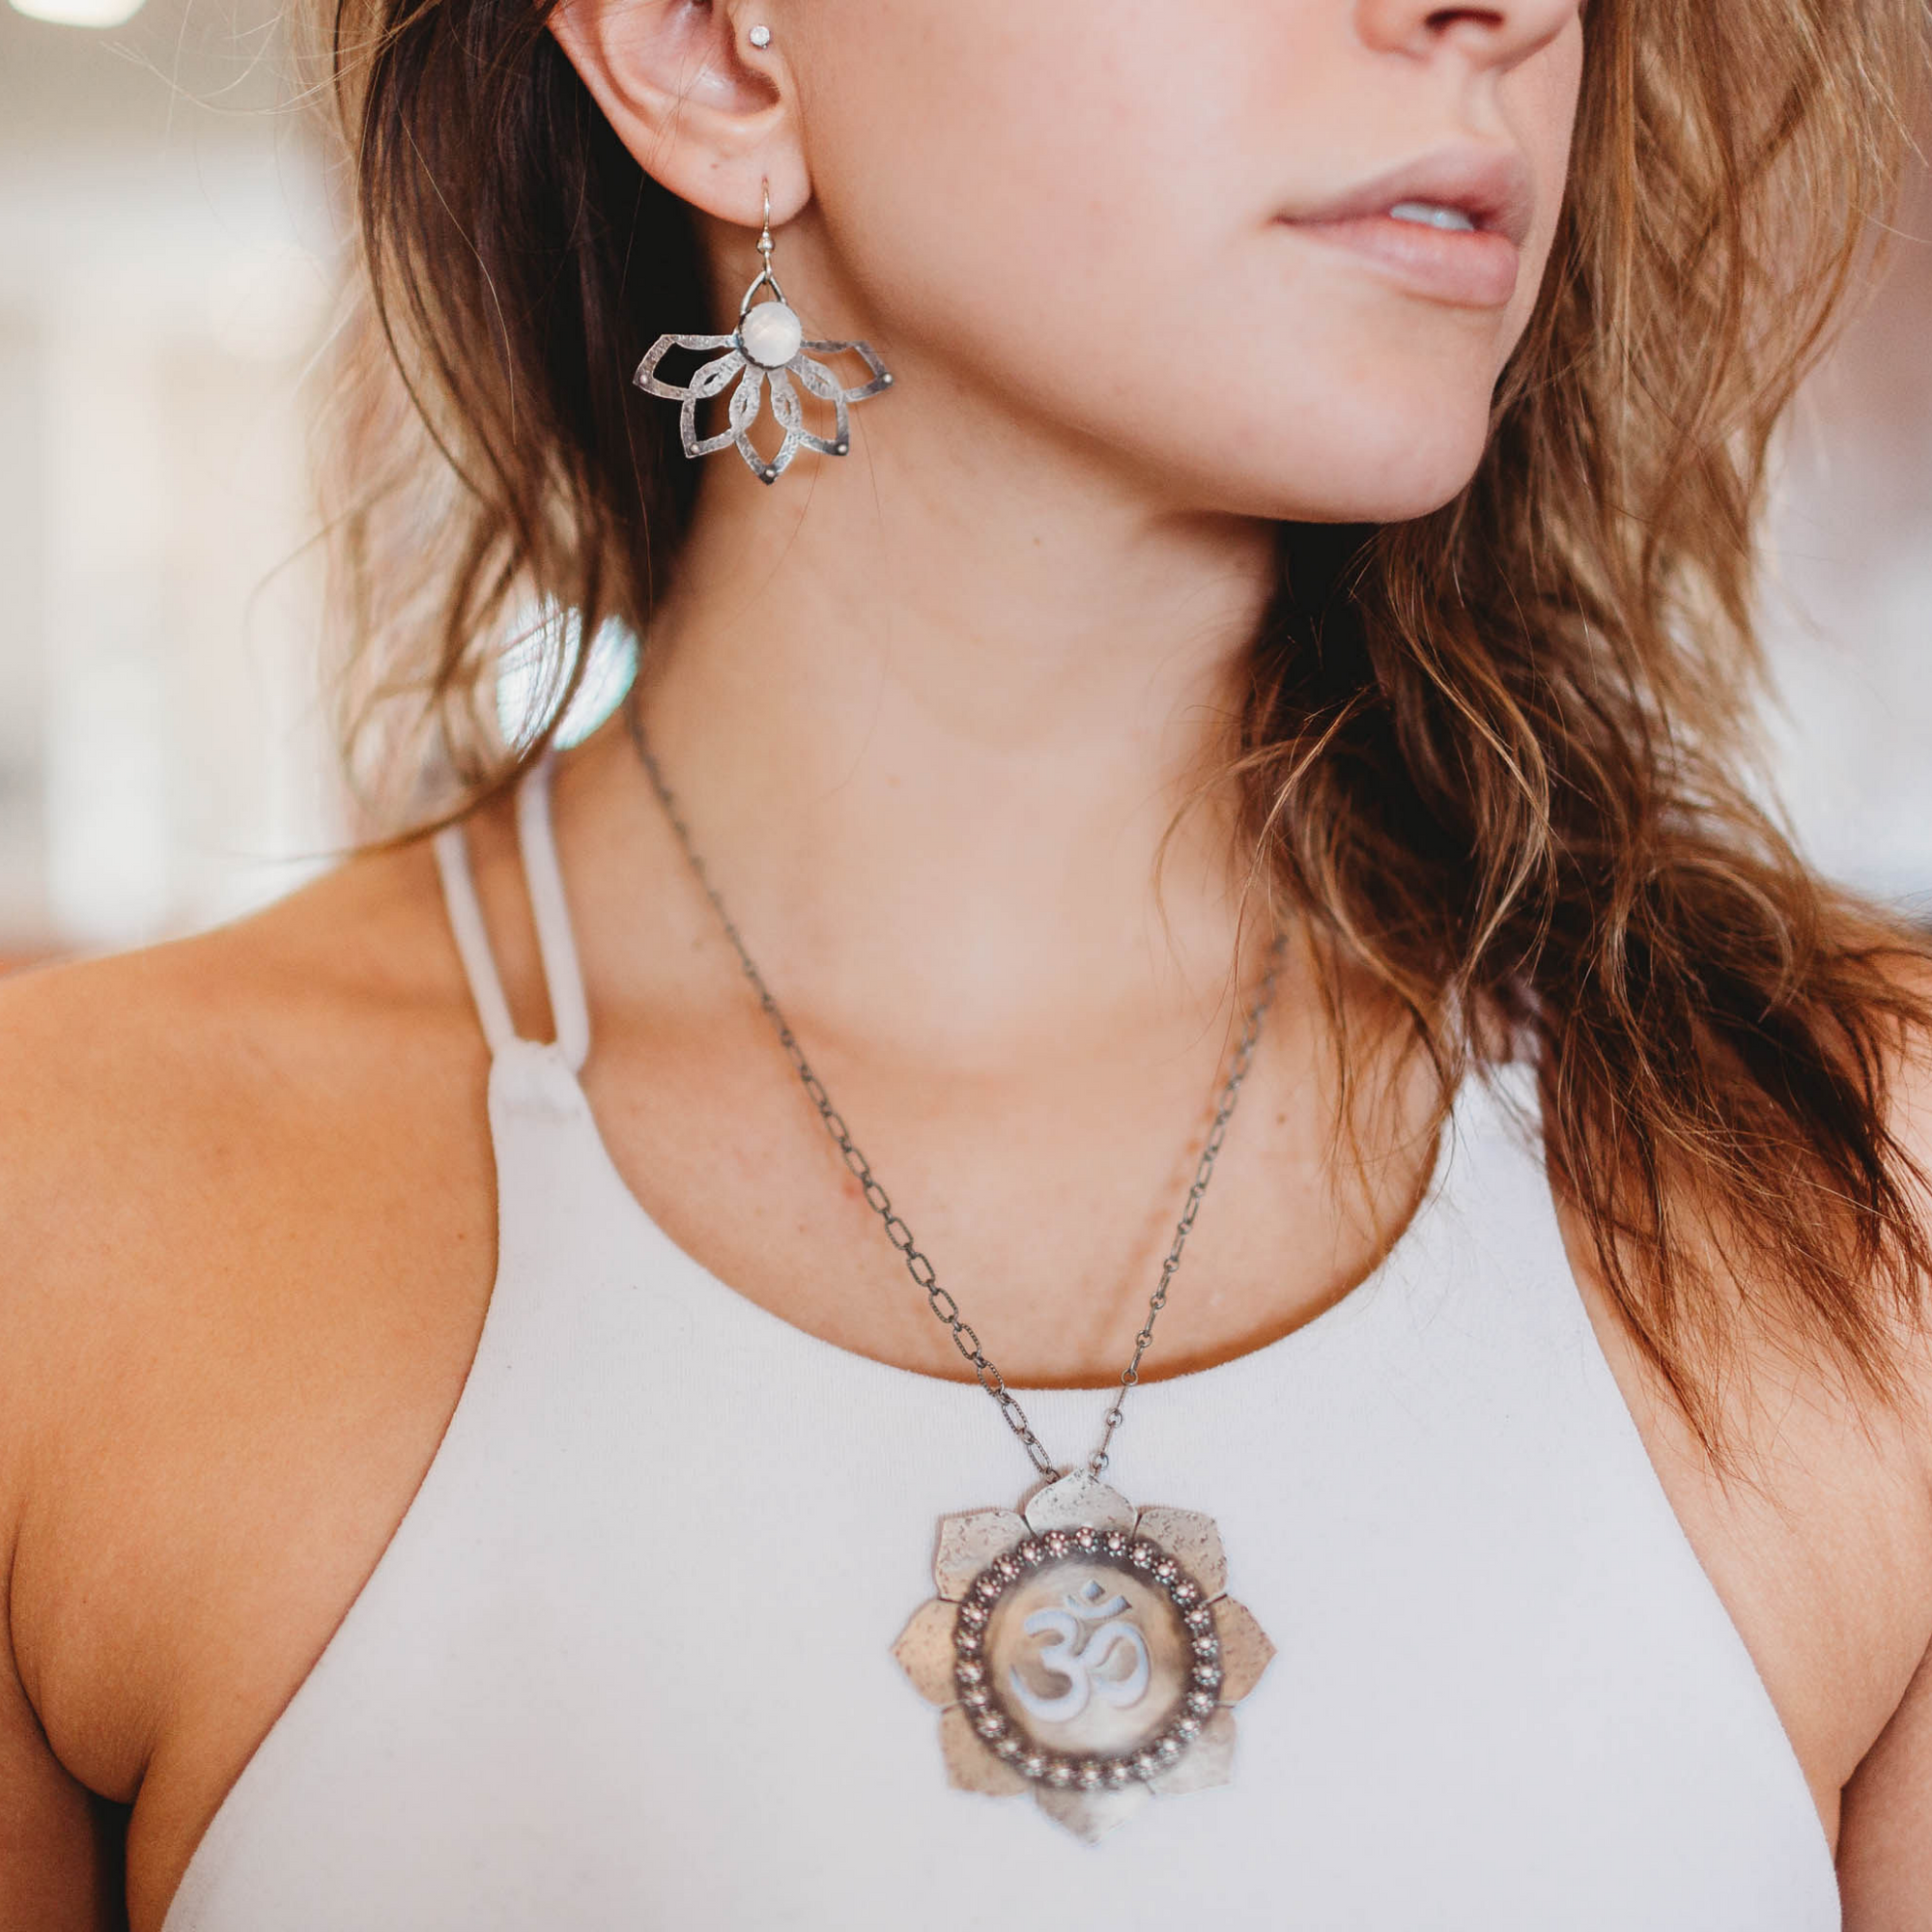 Lotus Necklace with Om Ohm Design and Lotus Earrings with a Moonstone in Yoga Collection